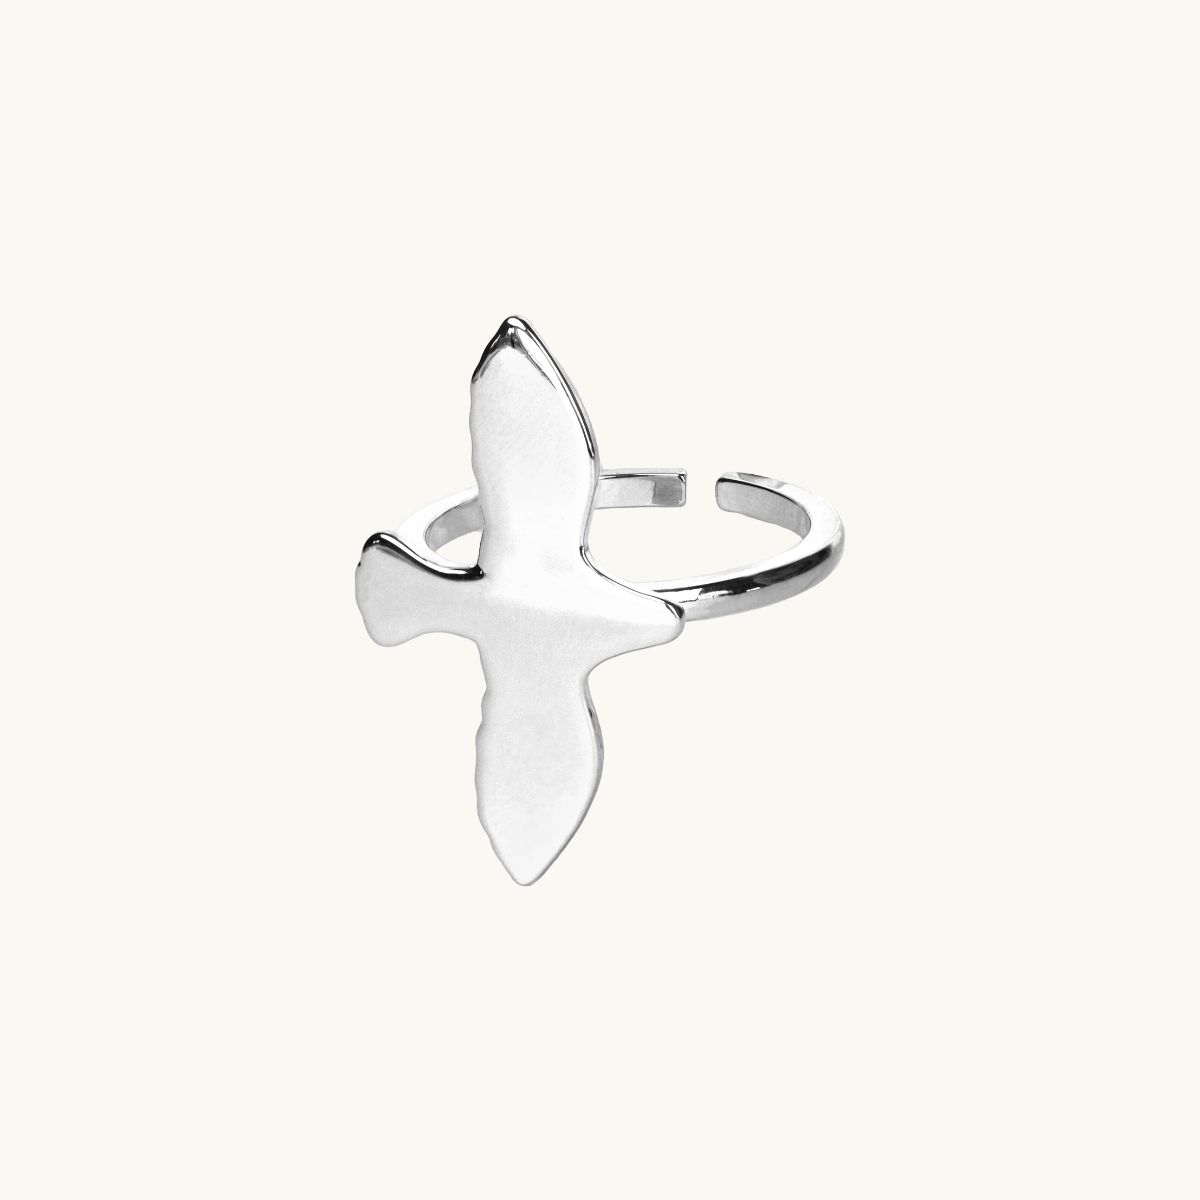 Adjustable ring in silver in shape of a dove